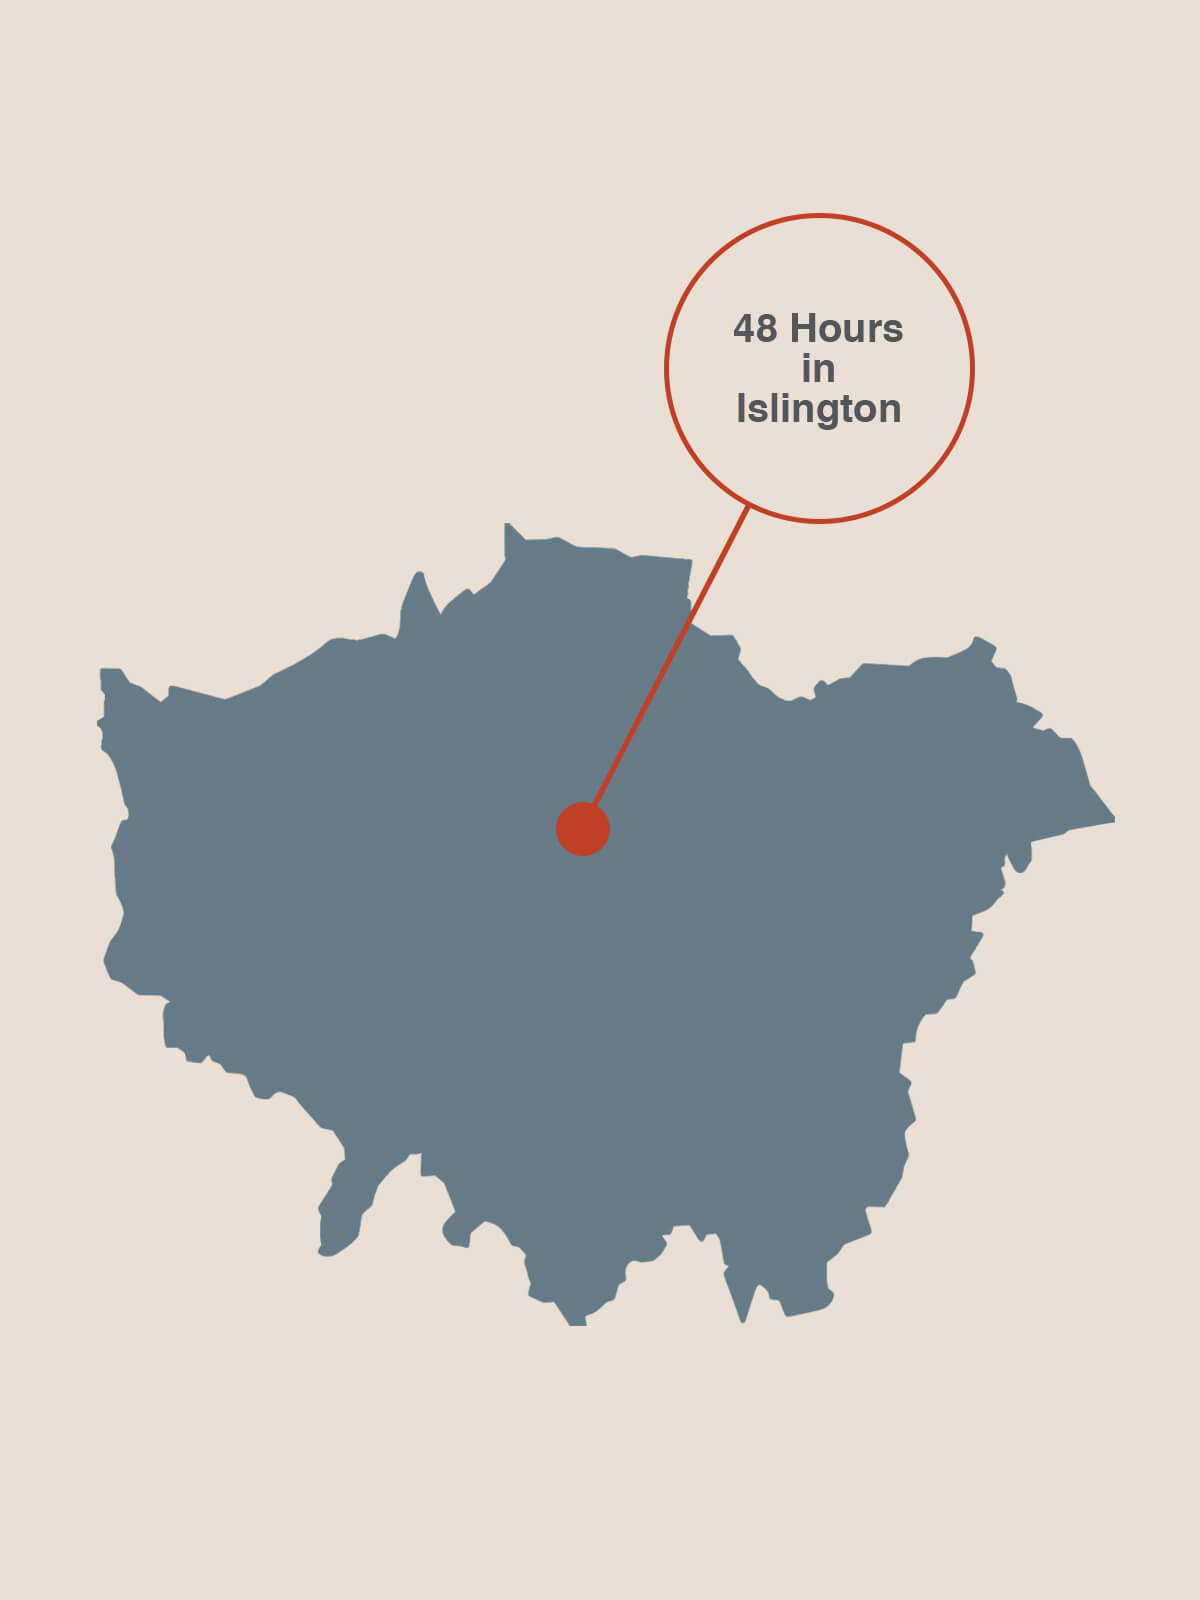 A lovation map of Islington within London.